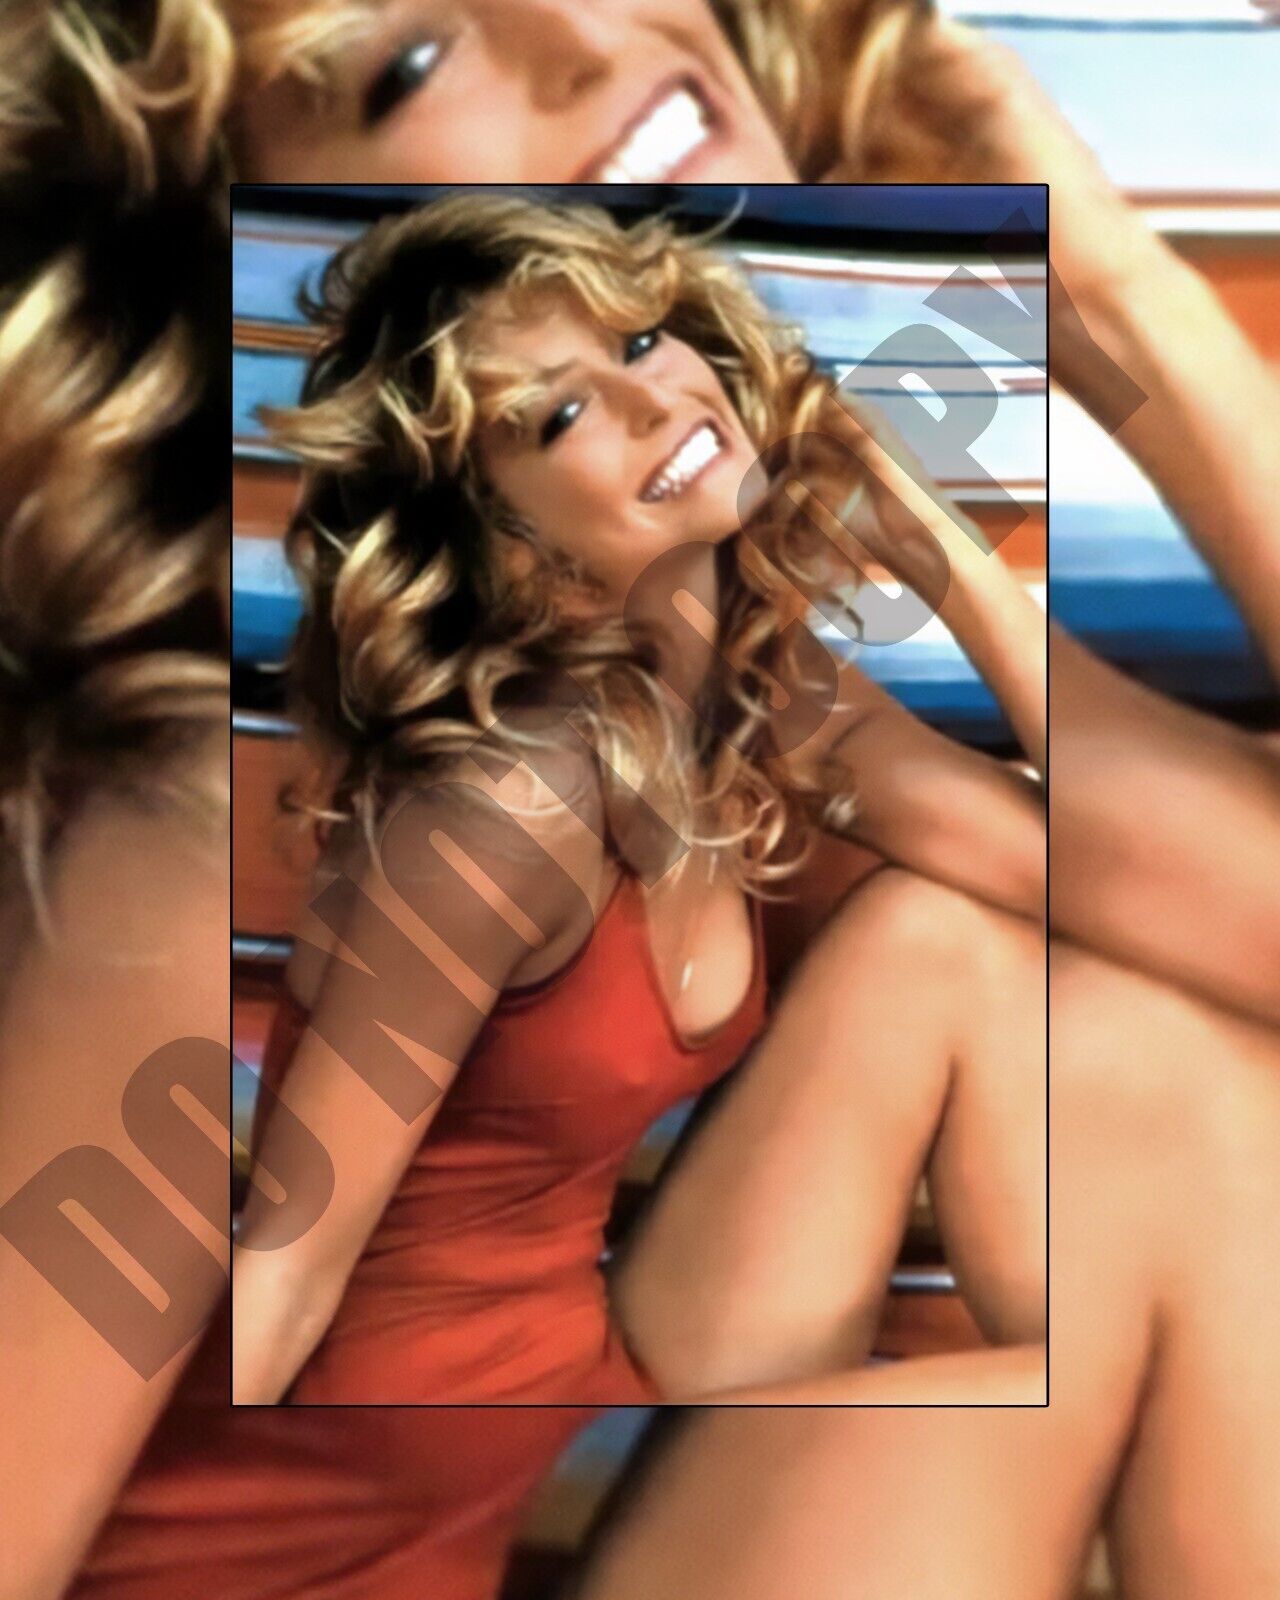 1970s Farrah Fawcett In Her Famous Sexy Bathing Suit Poster Pin-Up 8x10 Photo